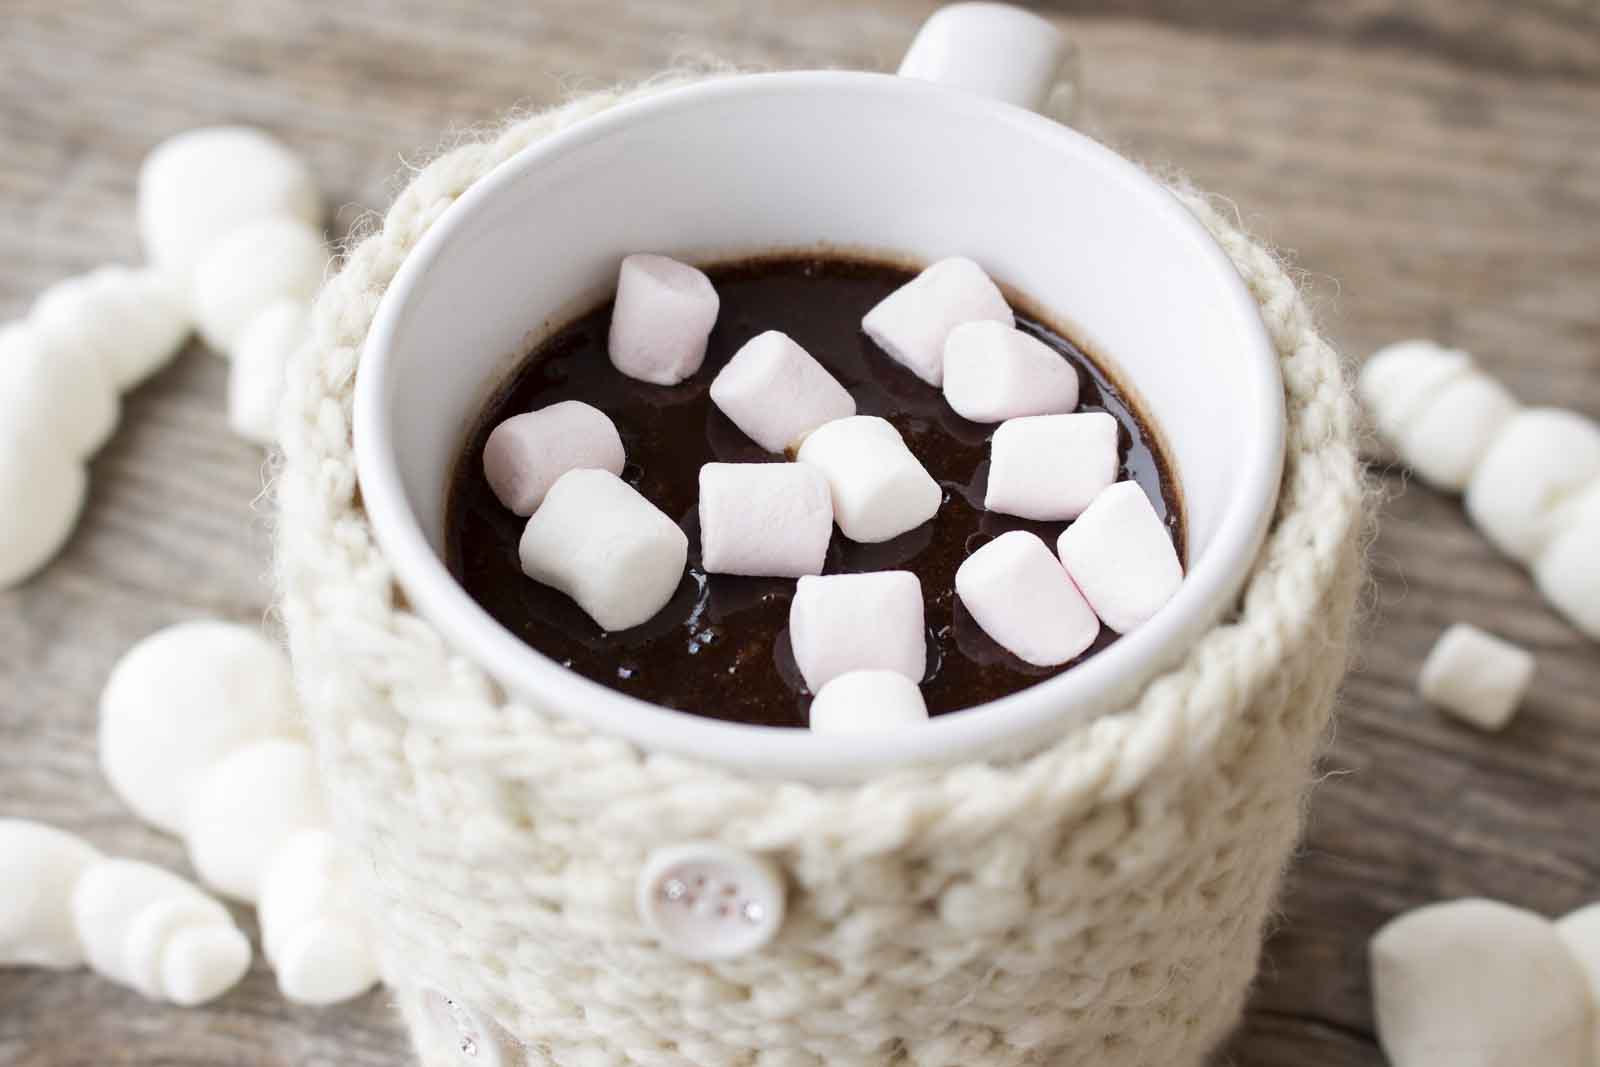 Homemade Hot Chocolate Recipe Try This Delicious Hot Cocoa Mix and Use To Make Homemade Gifts